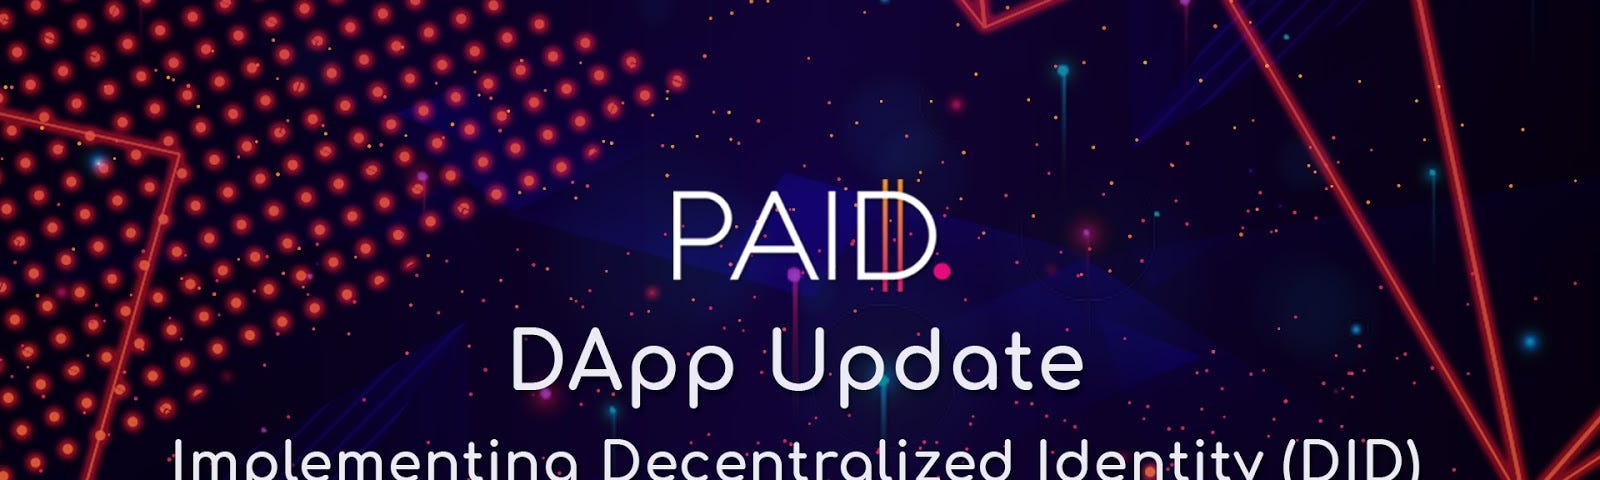 PAID DApp Update: Implementing Decentralized Identity (DID)